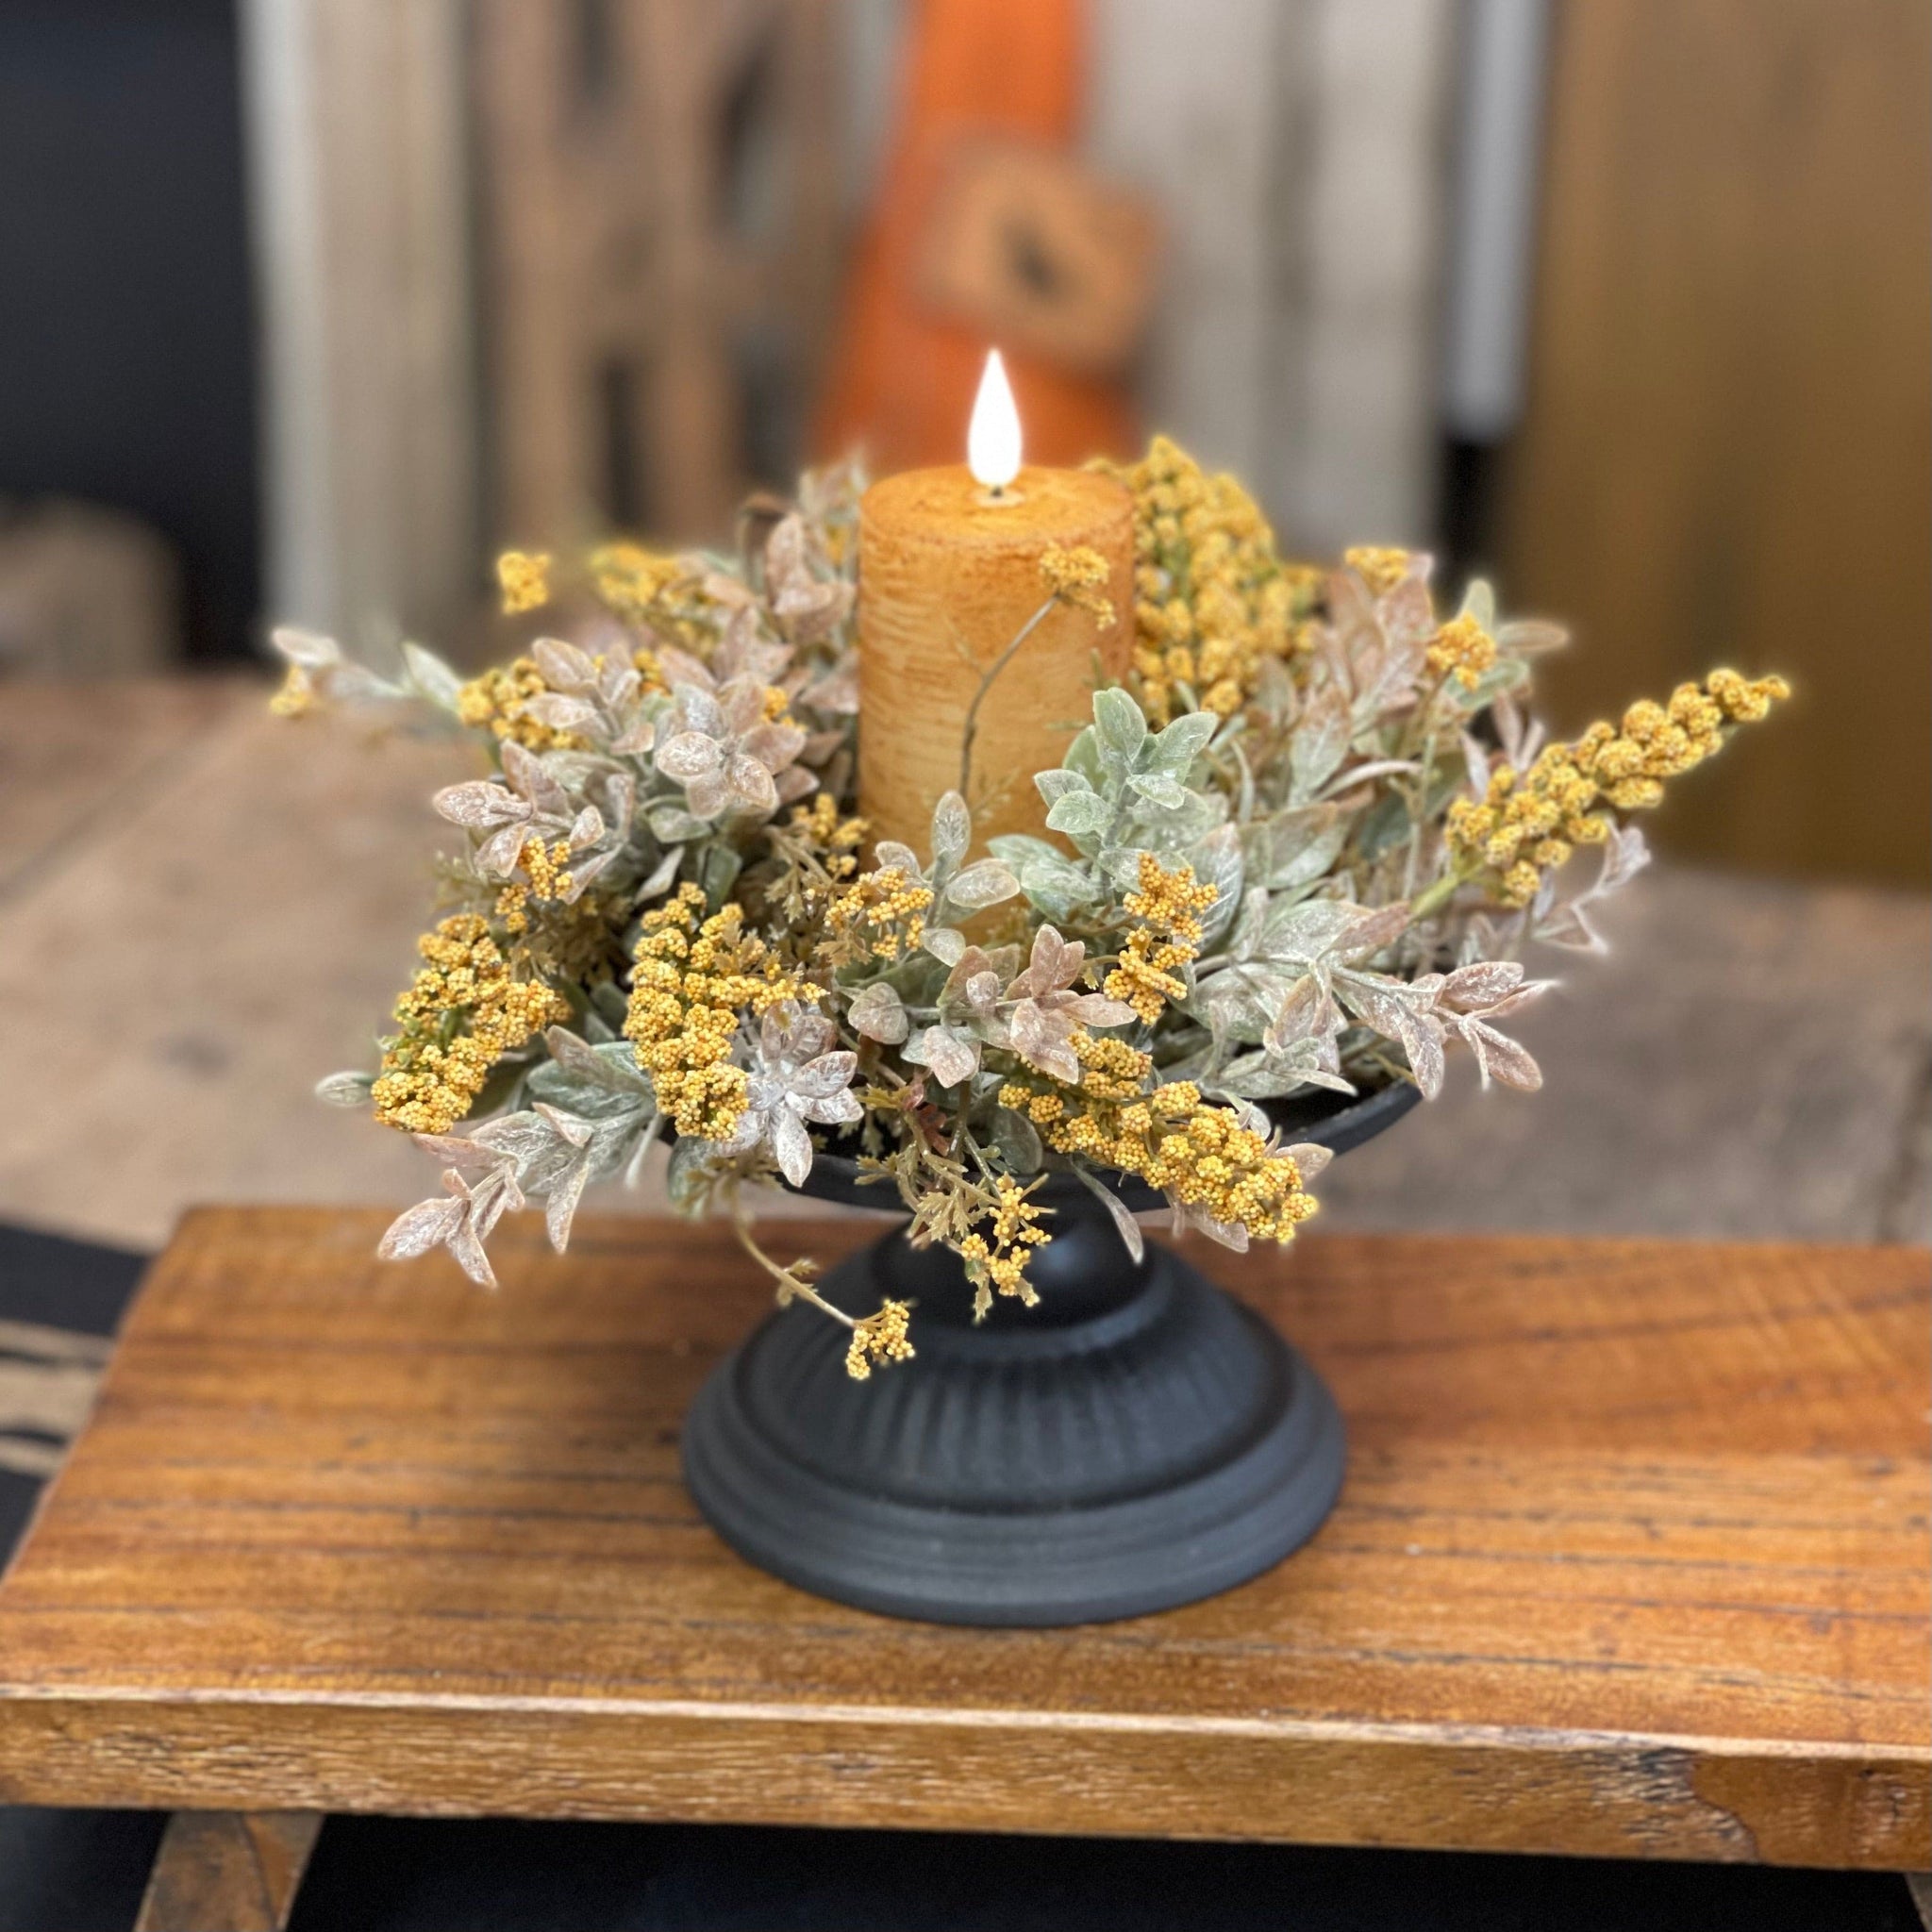 Fall Timer Candle - Buy 1 or 2! Accent Lighting, Candles, Country Fall Decor, Country Lighting, Fall, Fall Decor, Fall Decorating, Fall Decorating Ideas, Farmhouse Fall Decor, Farmhouse Lighting, Lighting, New, Outdoor Lighting, Primitive Fall Decor, Primitive Lighting, Rustic Fall Decor 